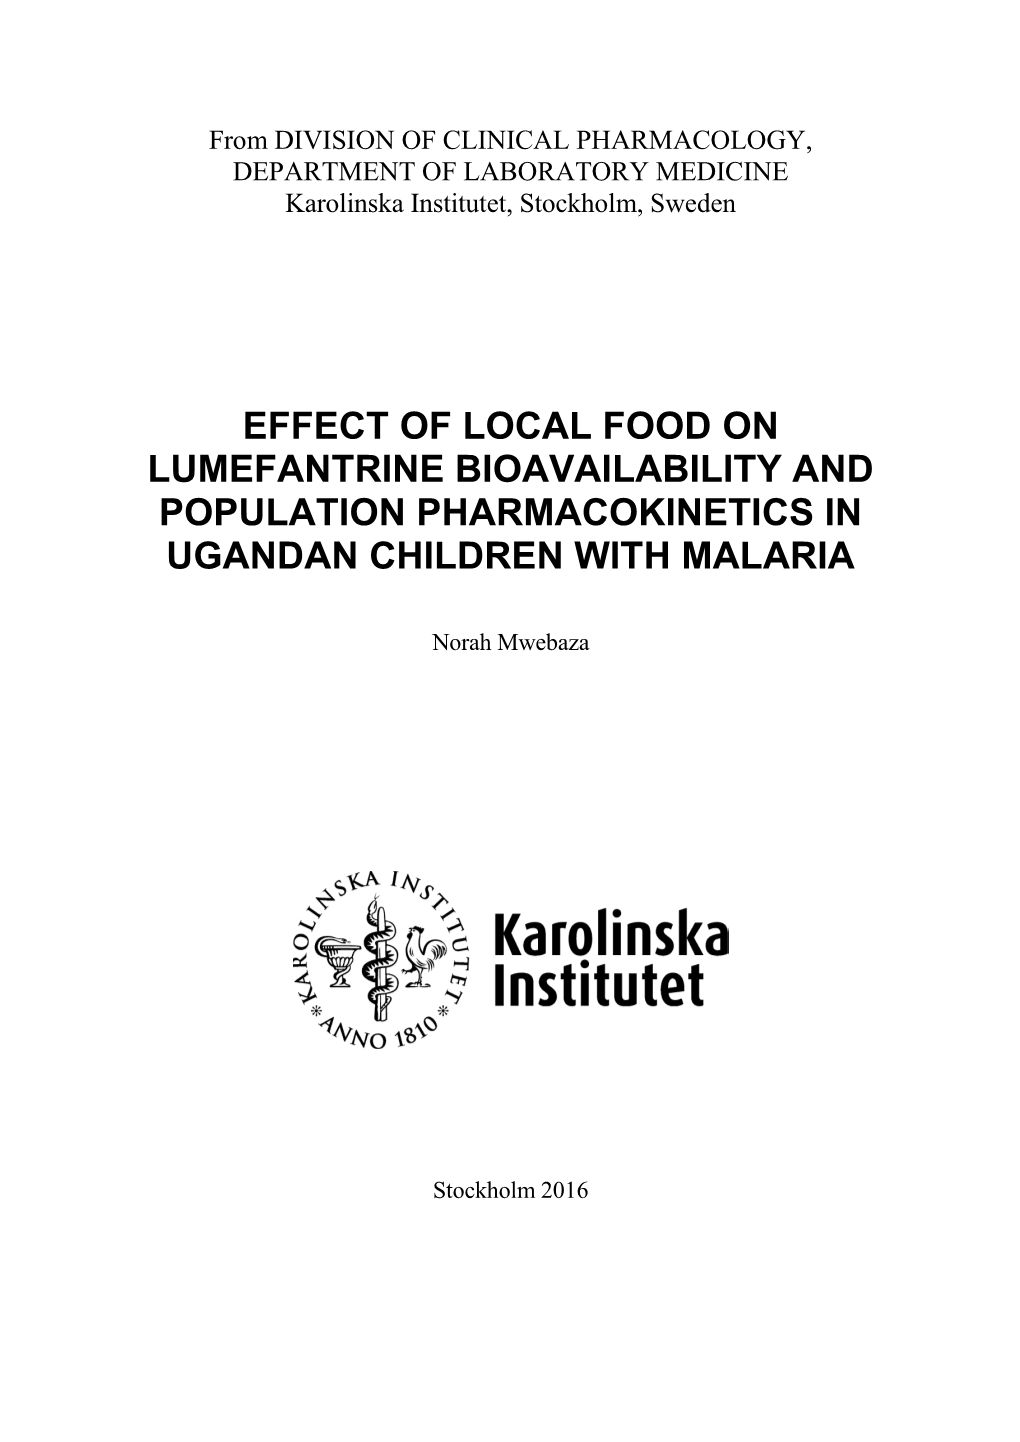 Effect of Local Food on Lumefantrine Bioavailability and Population Pharmacokinetics in Ugandan Children with Malaria